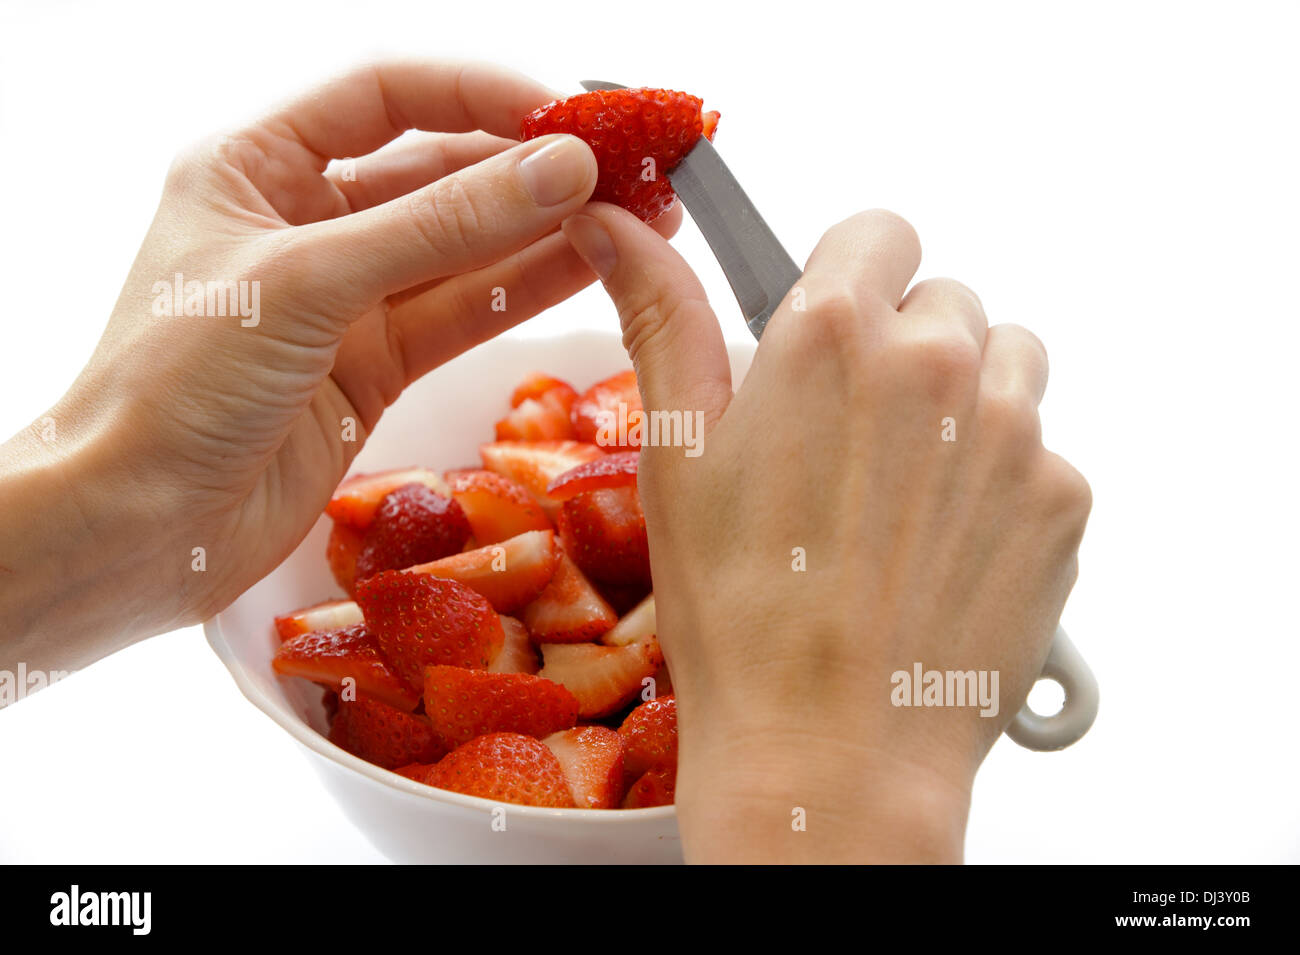 Woman's hands when cutting strawberries Stock Photo